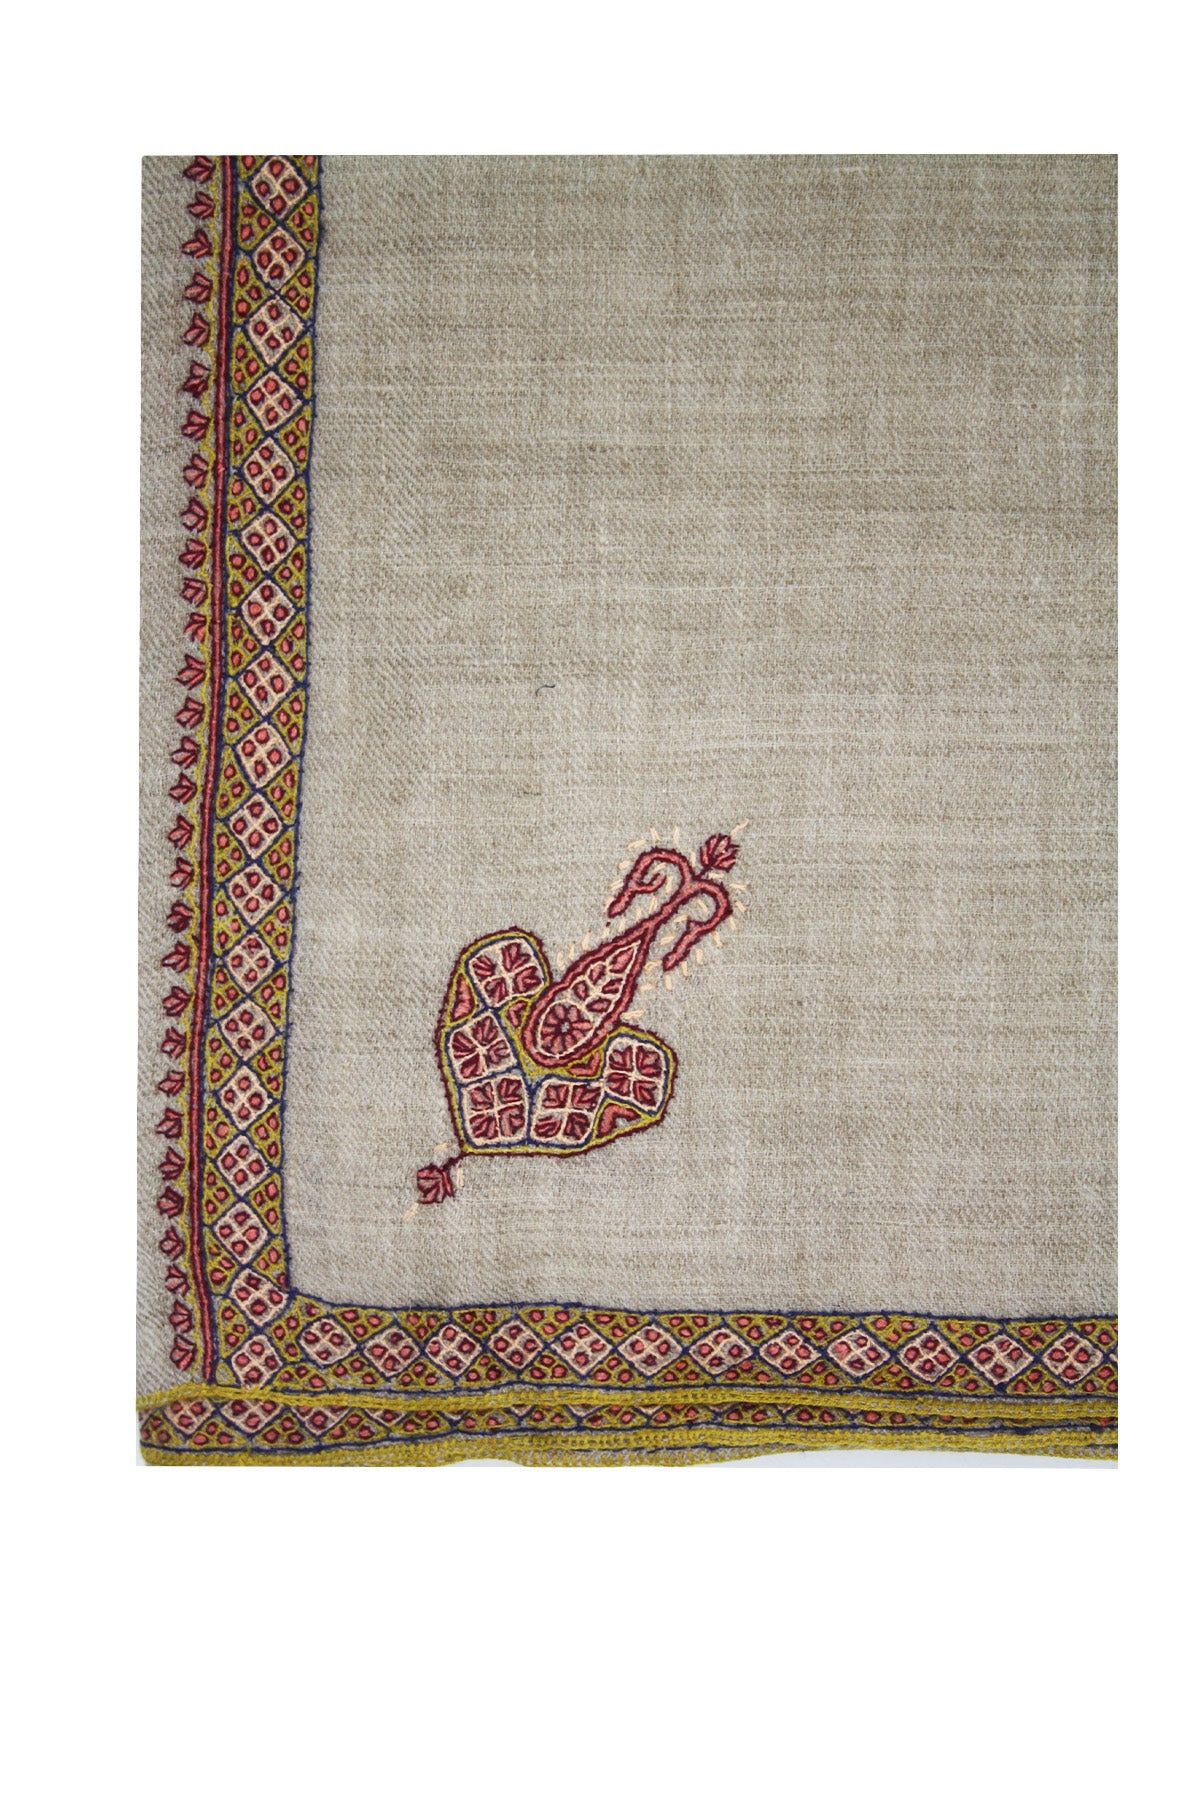 Border Embroidered Cashmere Pashmina Shawl- Natural with Mustard Edge